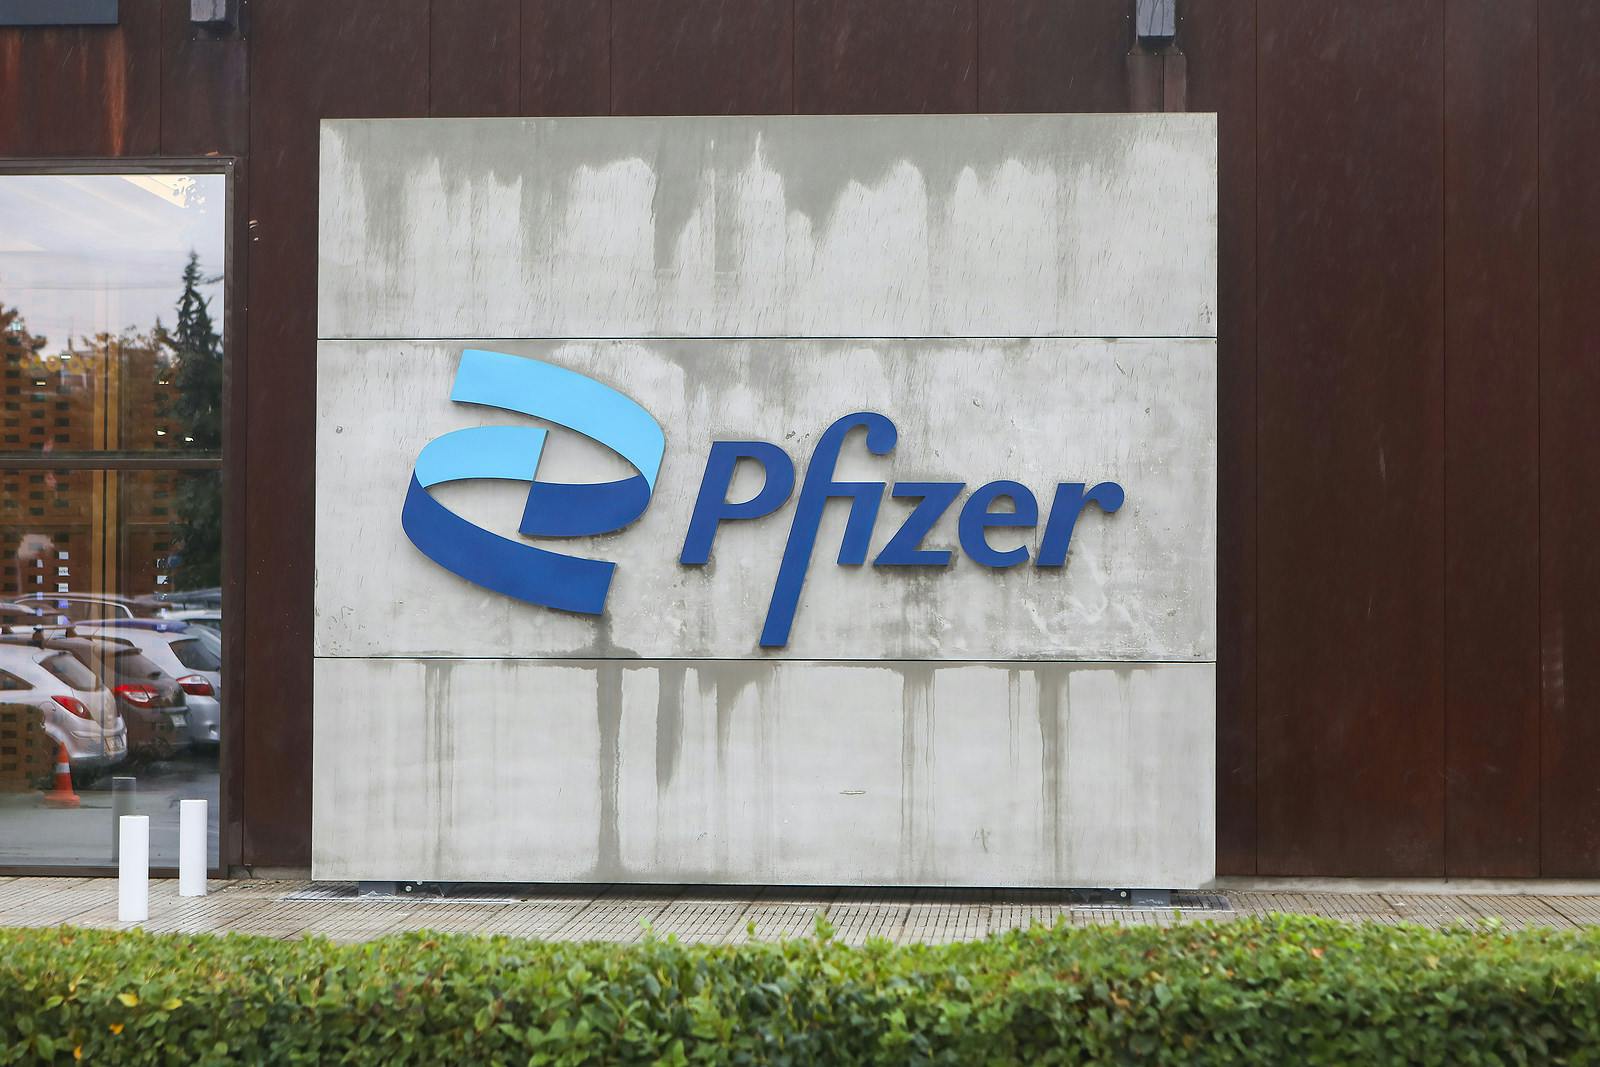 Pfizer sign outside of company